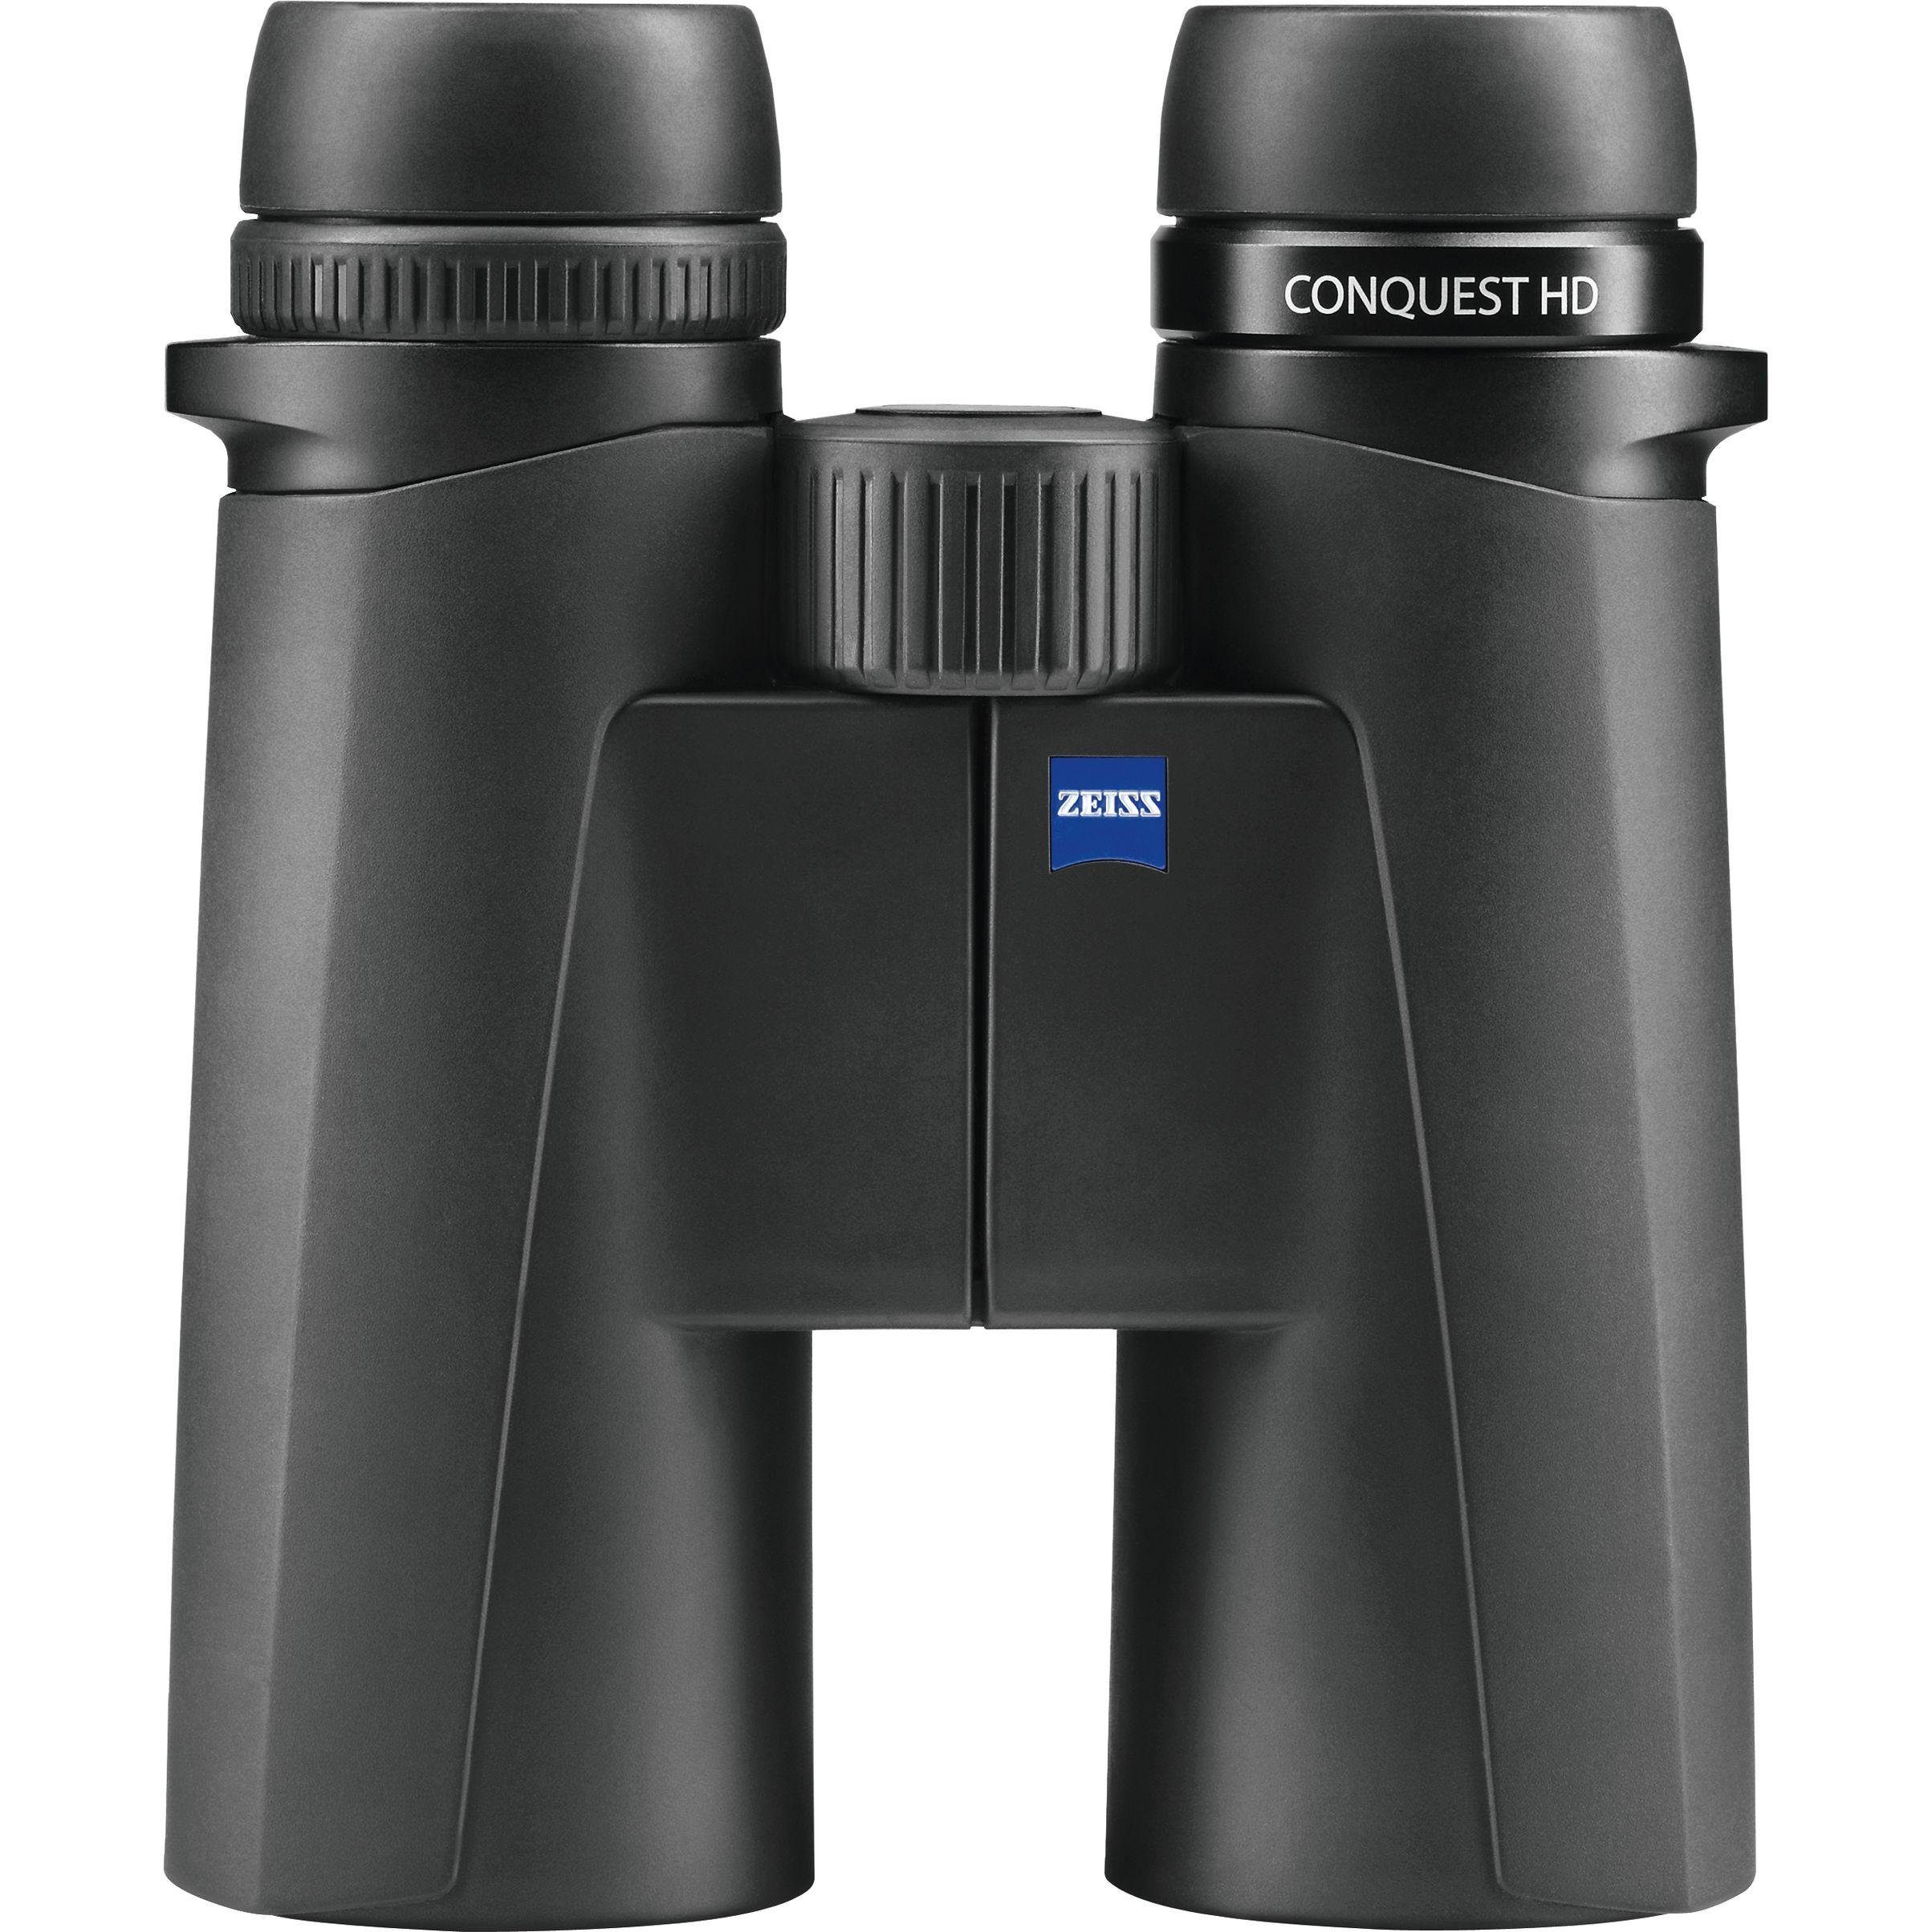 HD 10x42 Fernglas Conquest ZEISS